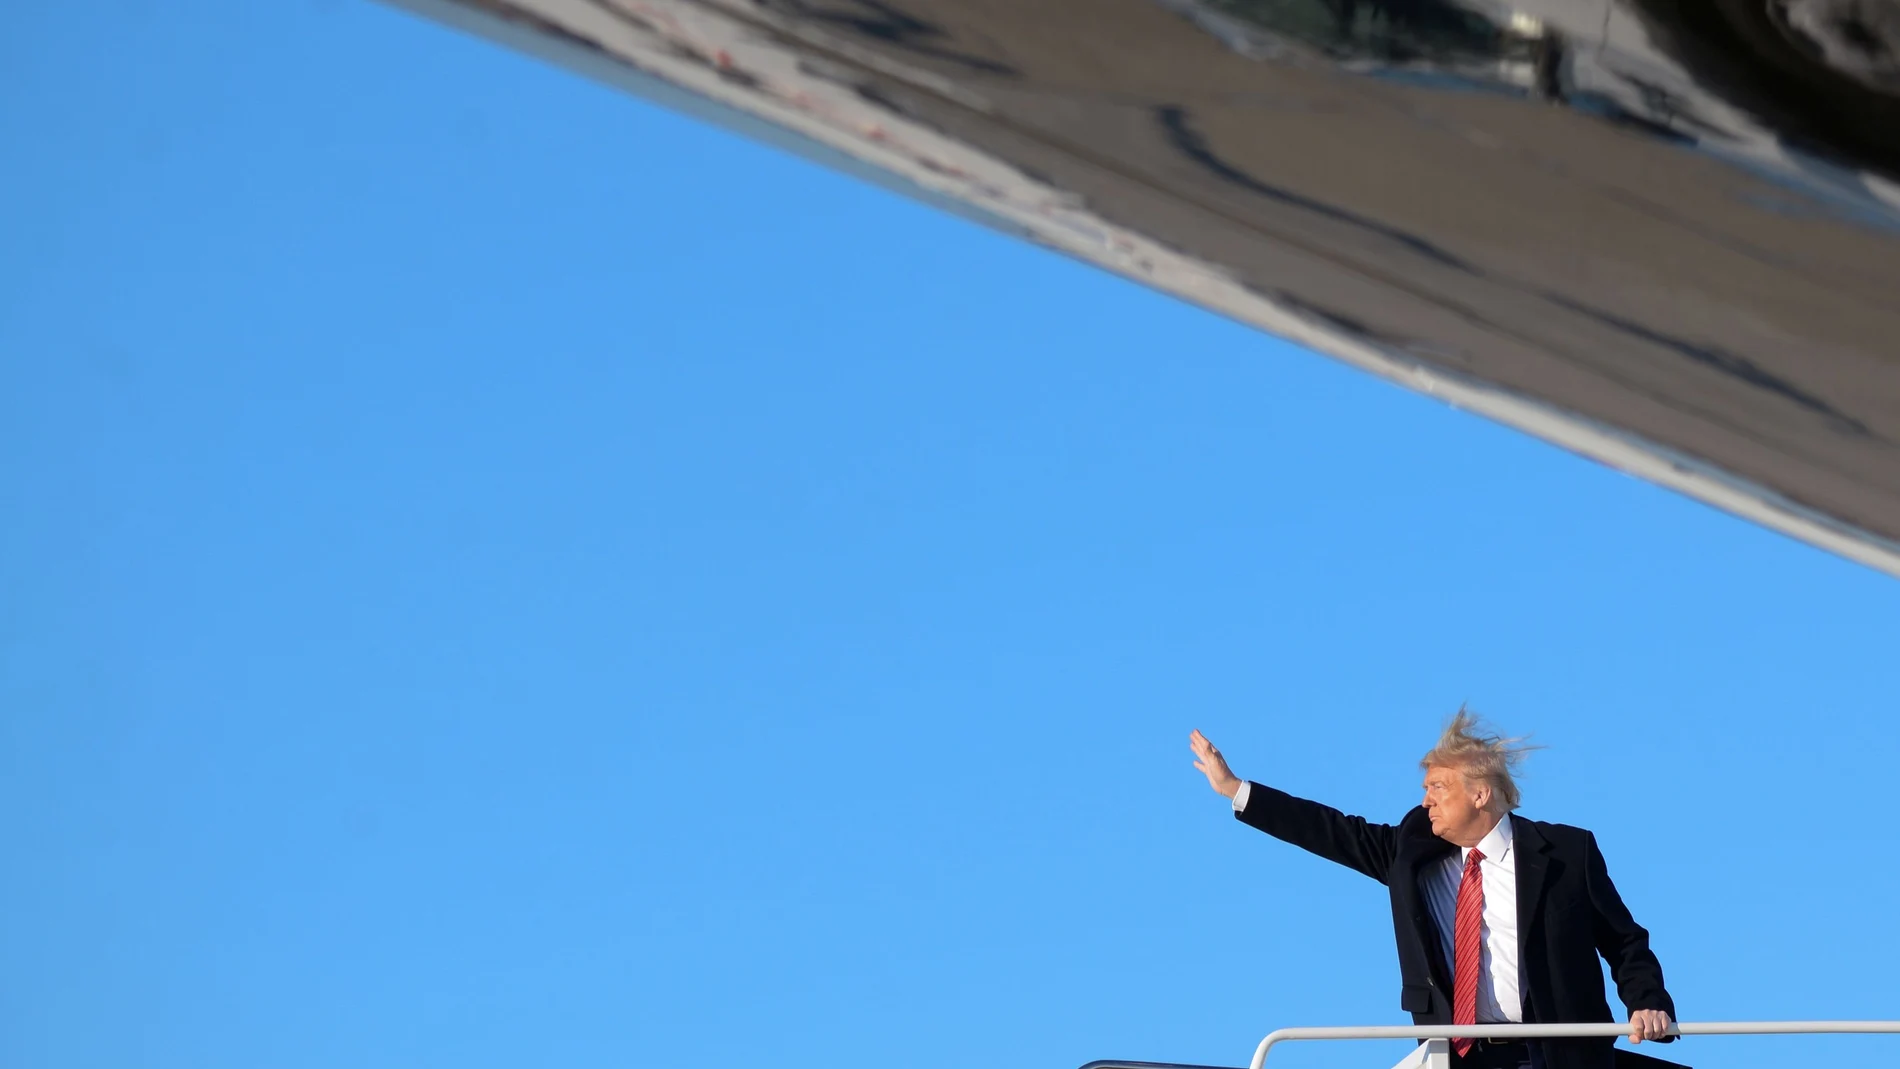 U.S. President Donald Trump boards Air Force One as they depart Washington for travel to Florida